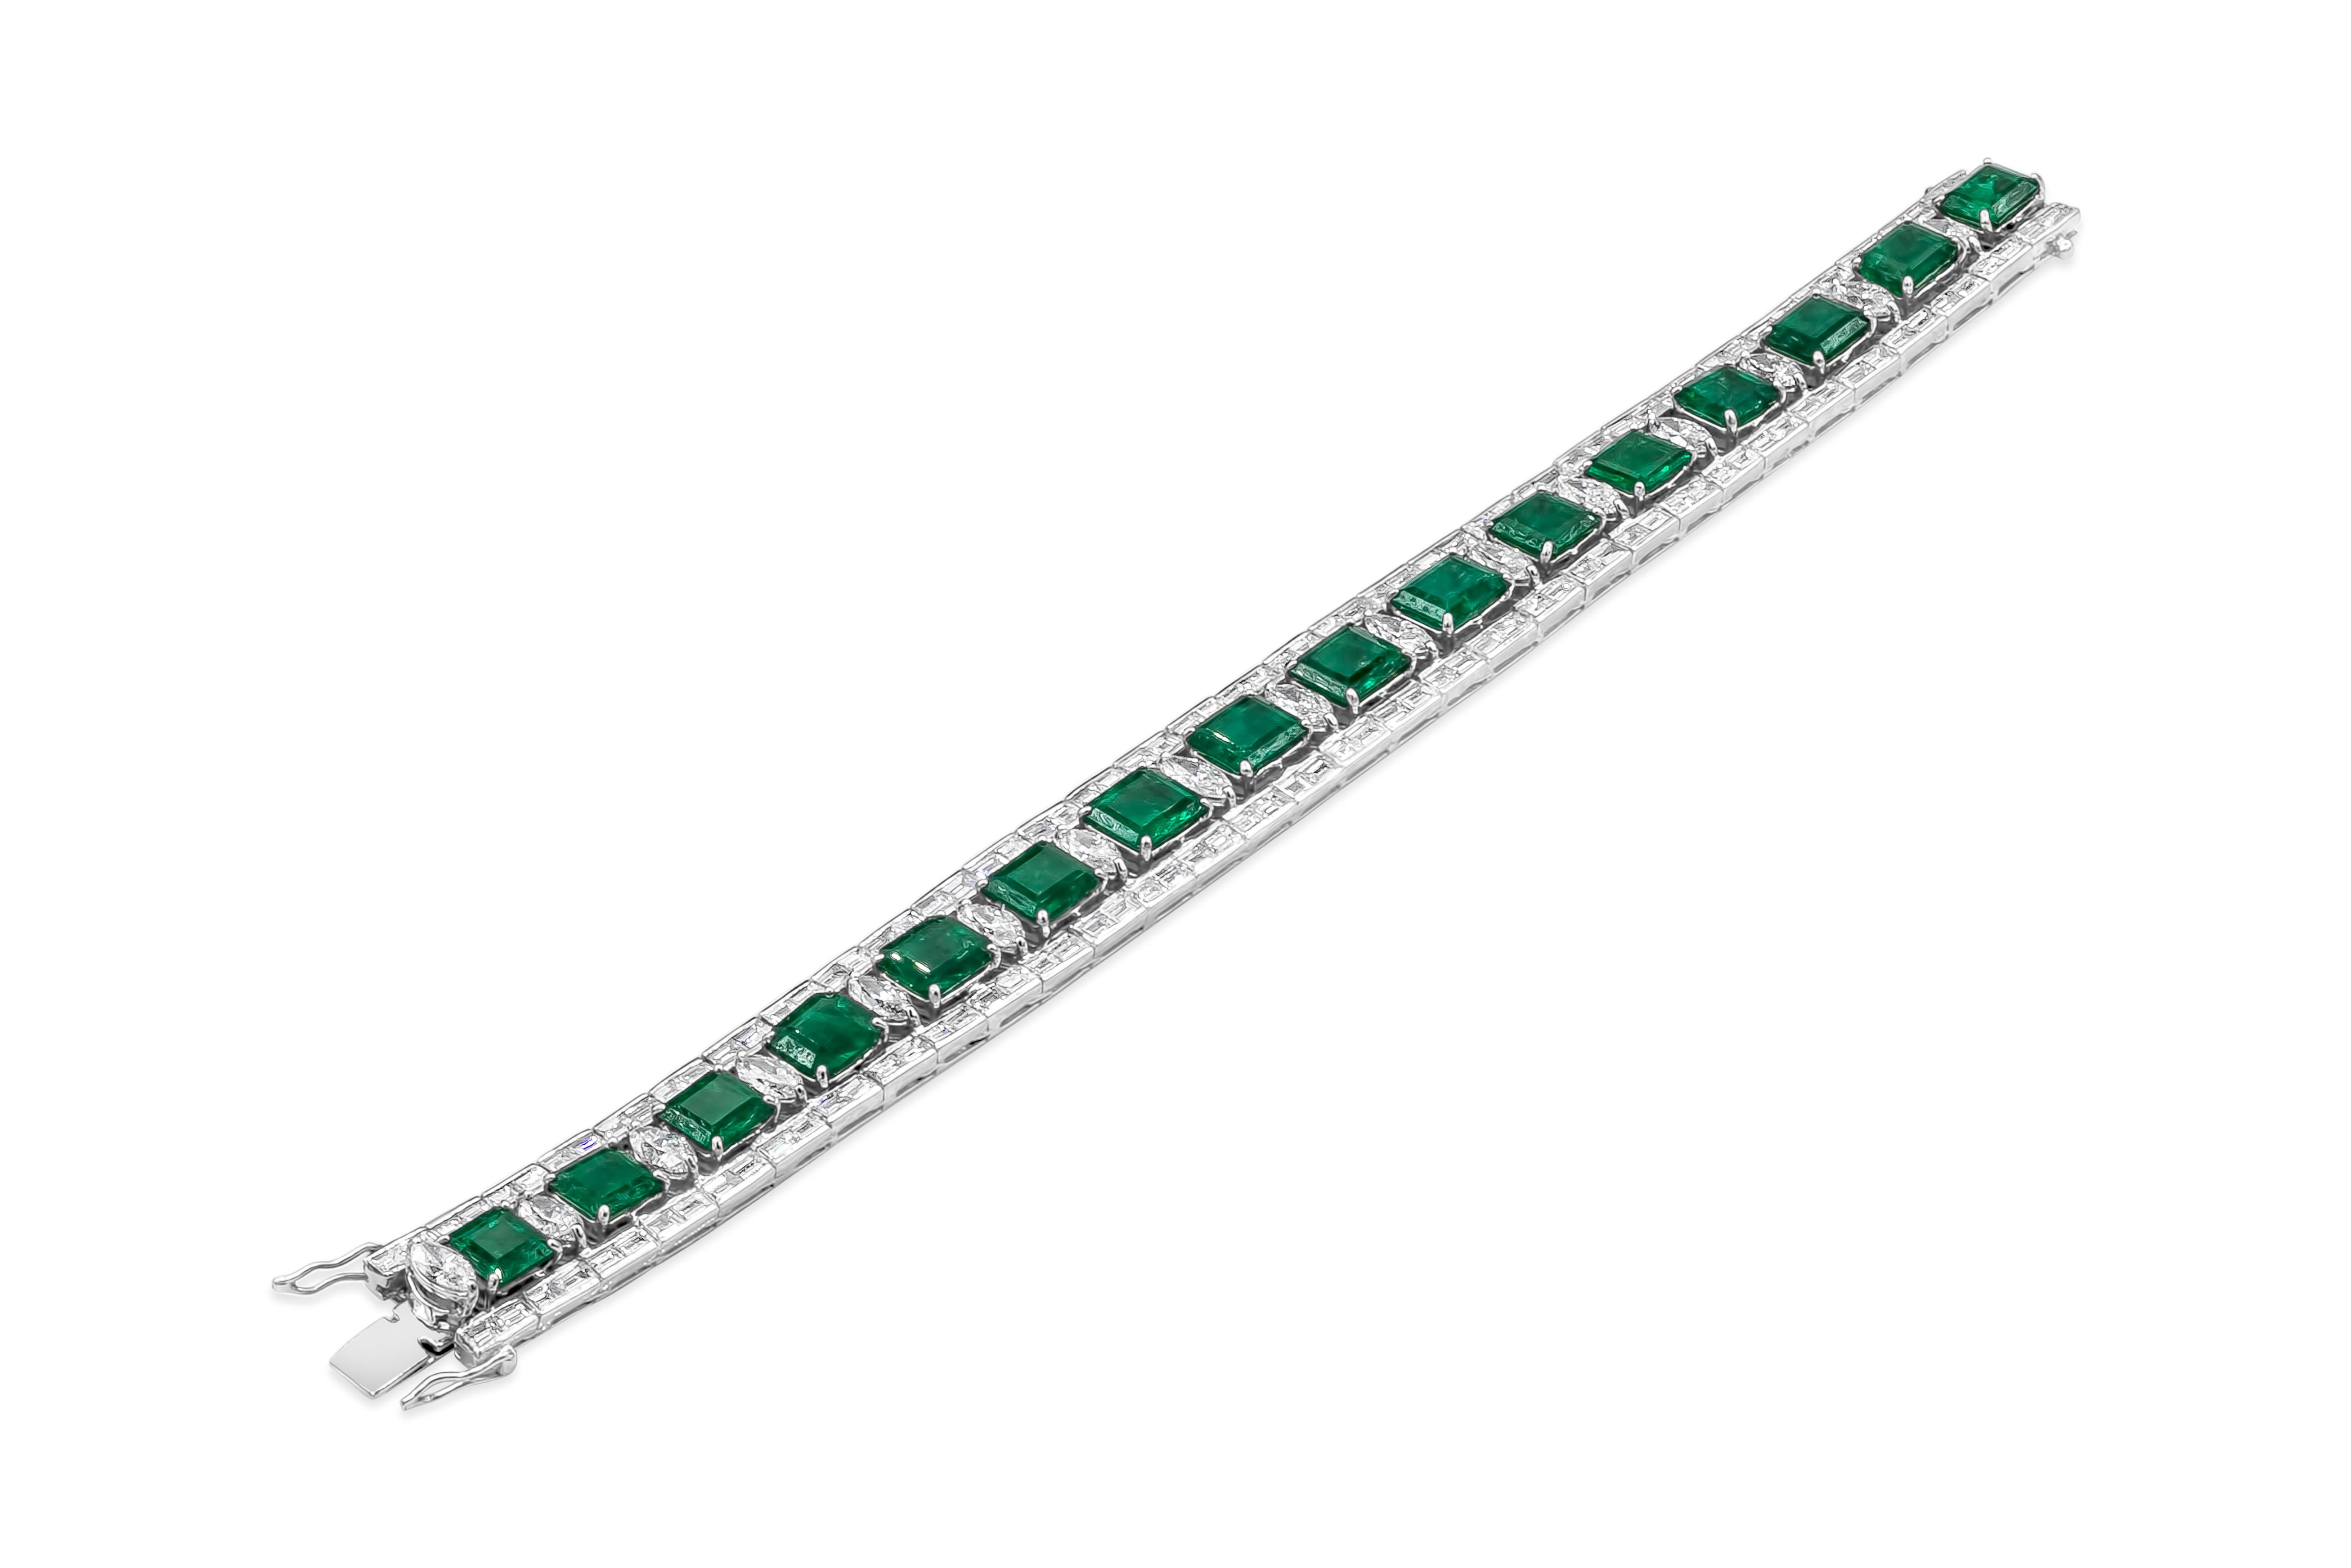 A well crafted and stylish high jewelry bracelet showcasing 16 vibrant green emerald gemstones weighing 21.41 carats total. Spaced by brilliant marquise cut diamonds in an open-work, 18k white gold design. Finished with baguette diamonds on each